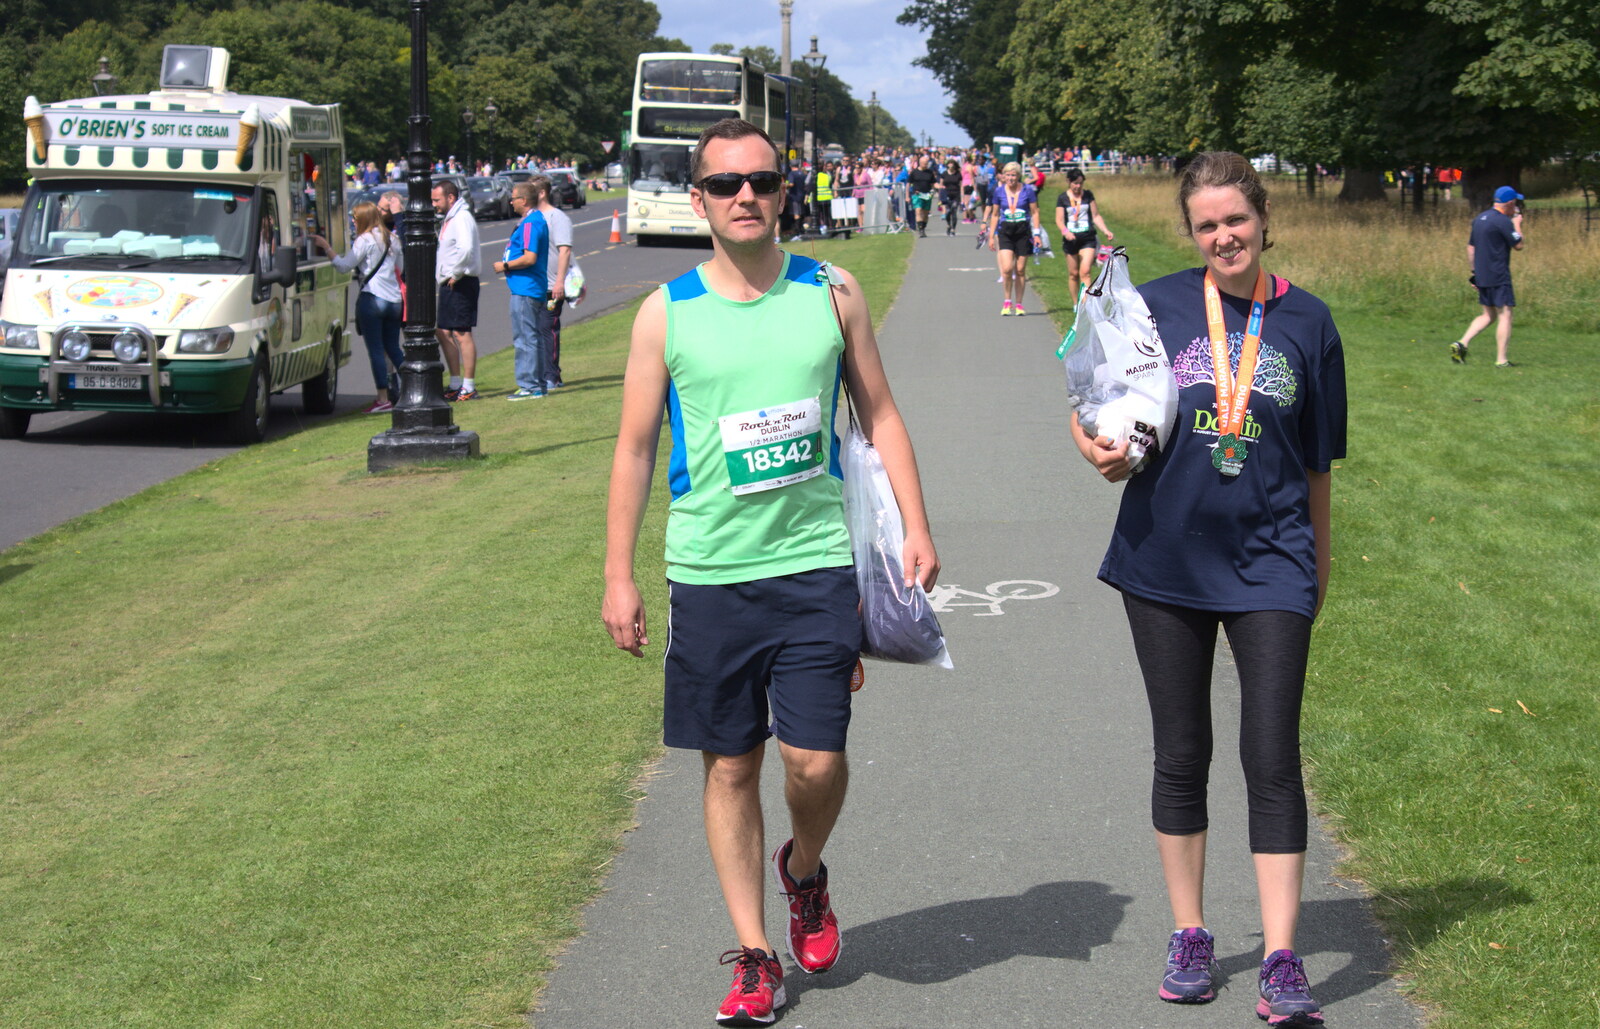 James and Isobel with theirs kit bags from Isobel's Rock'n'Roll Half Marathon, Dublin, Ireland - 13th August 2017